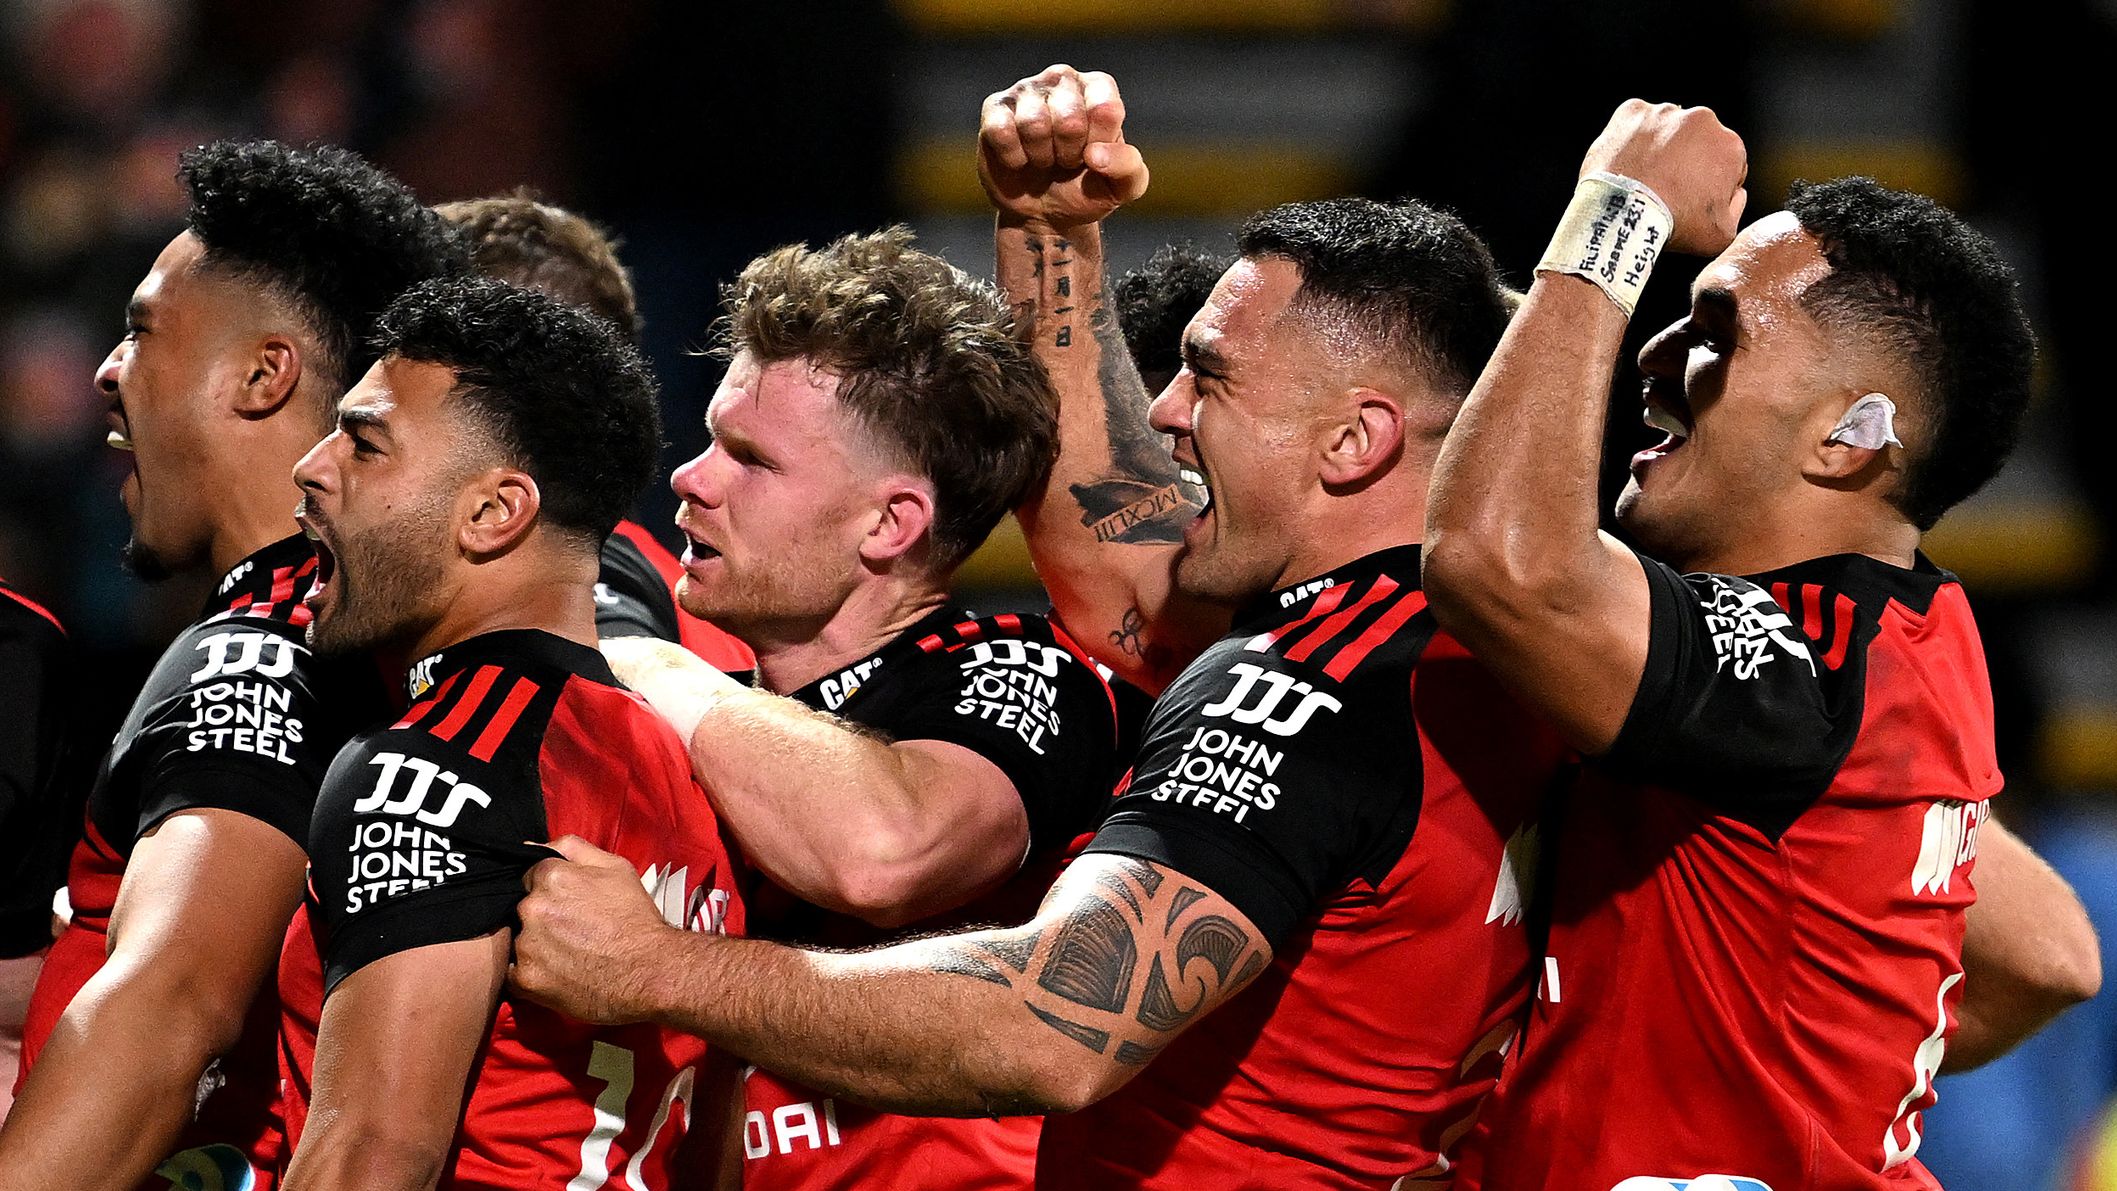 The Crusaders celebrate a try scored by Leicester Fainga&#x27;anuku during the Super Rugby Pacific Semi Final match against the Blues.